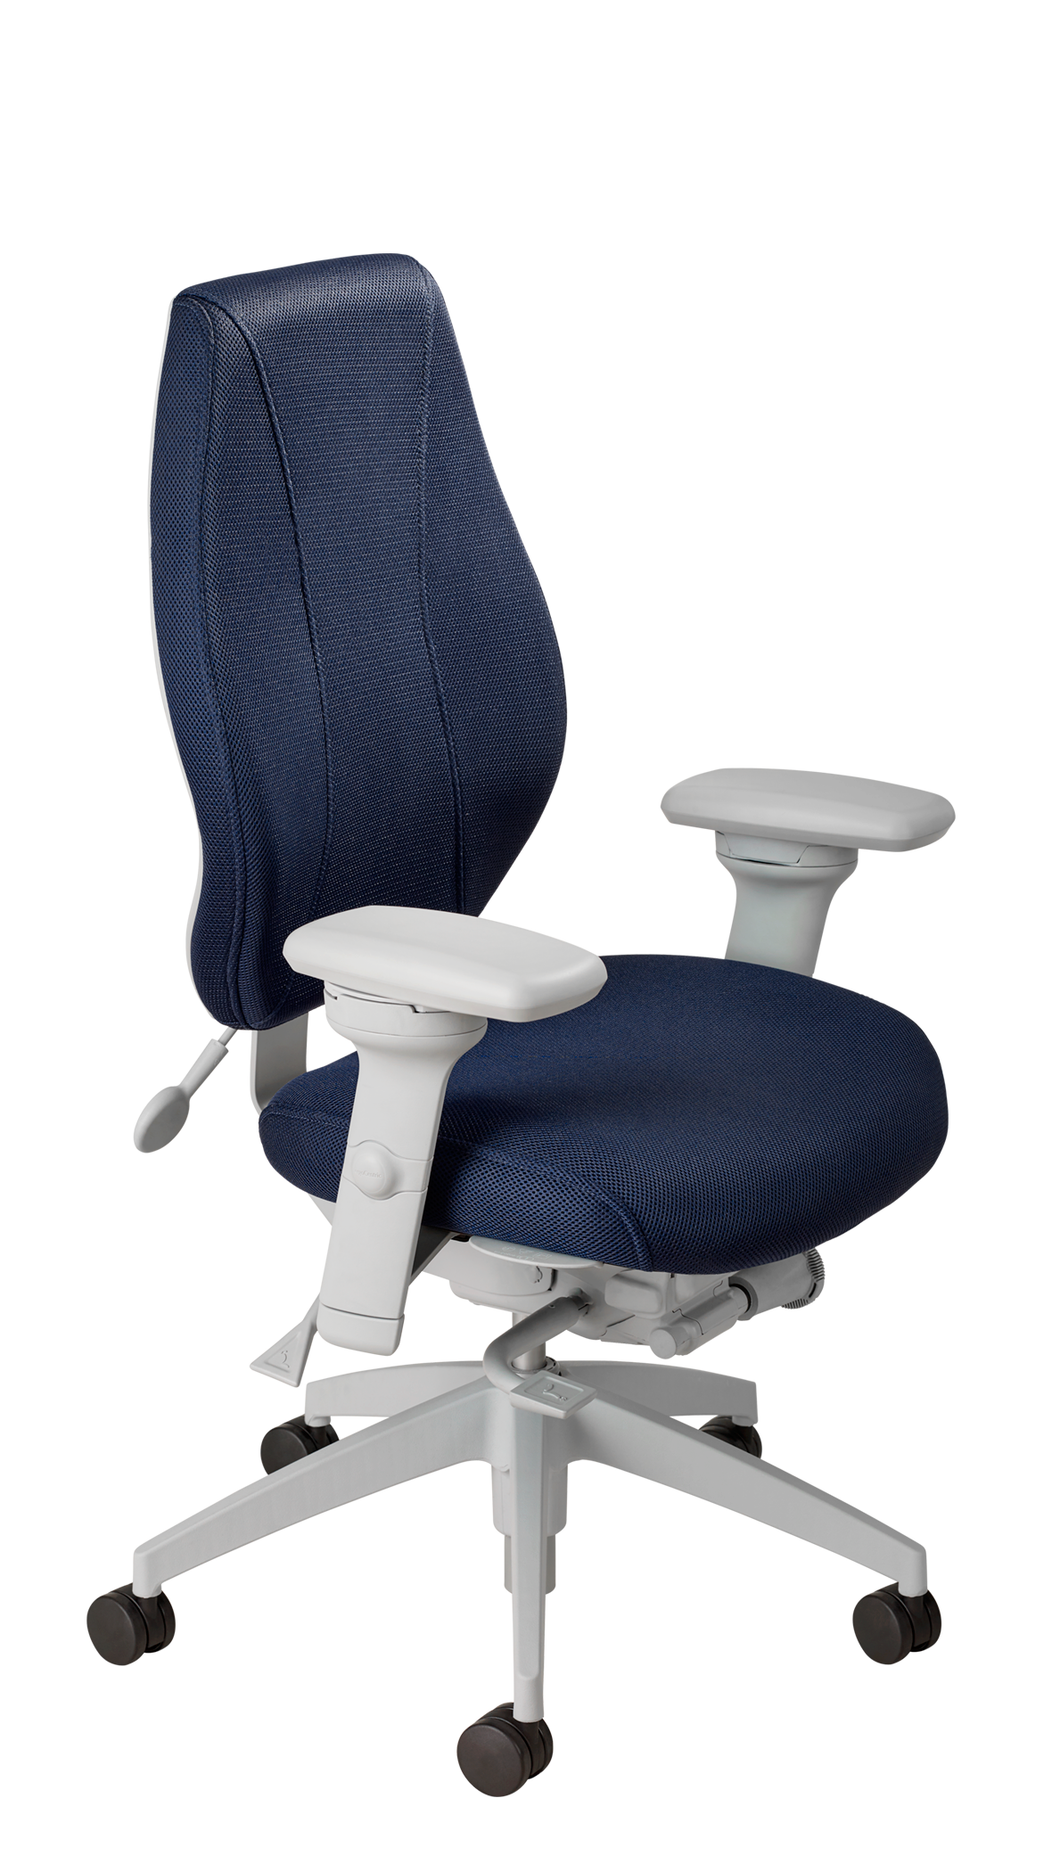 airCentric 2 with Synchro Glide Mechanism, Light Grey Frame, AirKnit Navy Upholstery